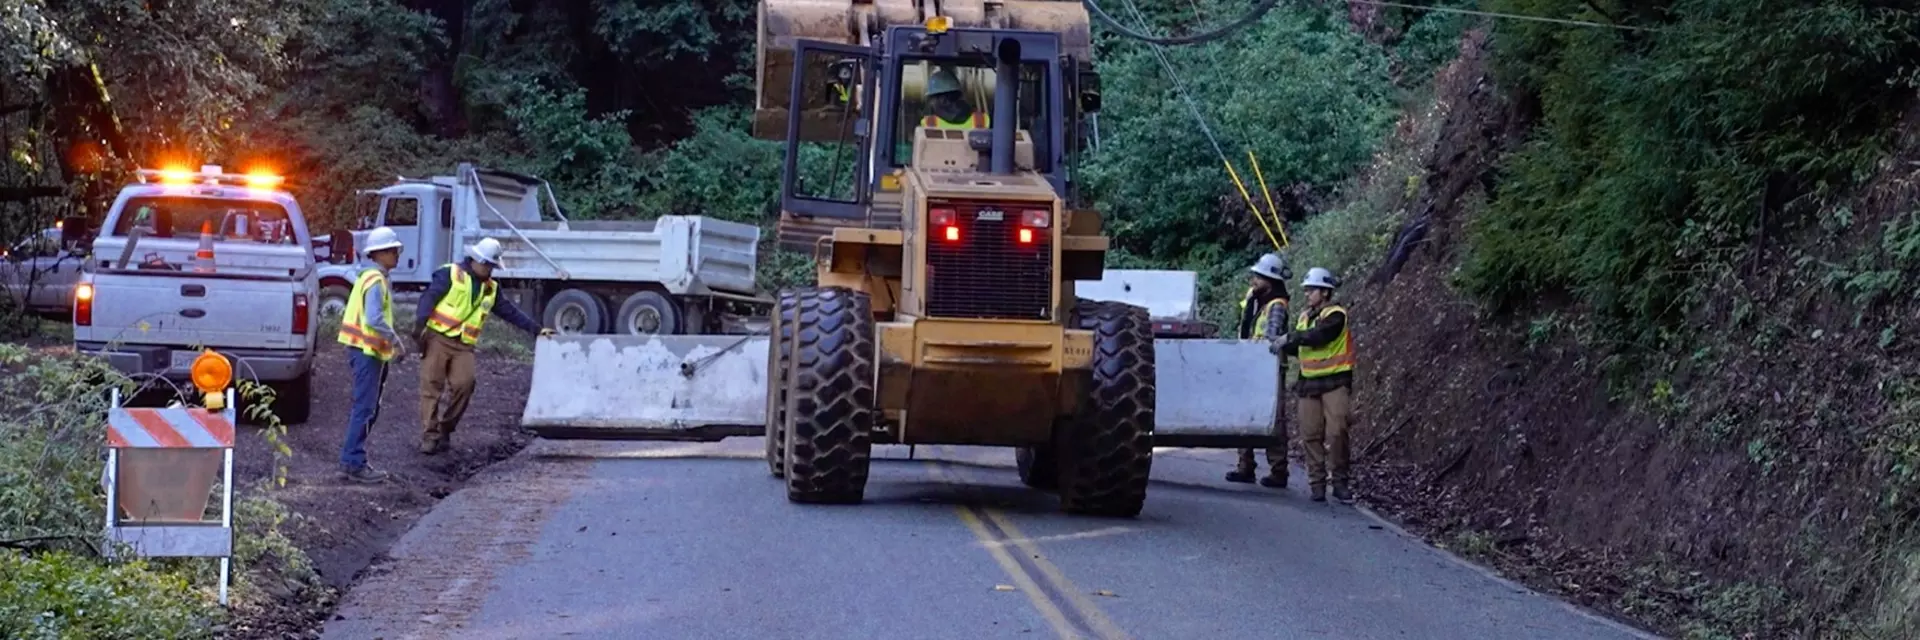 County fixes roads damaged by storms